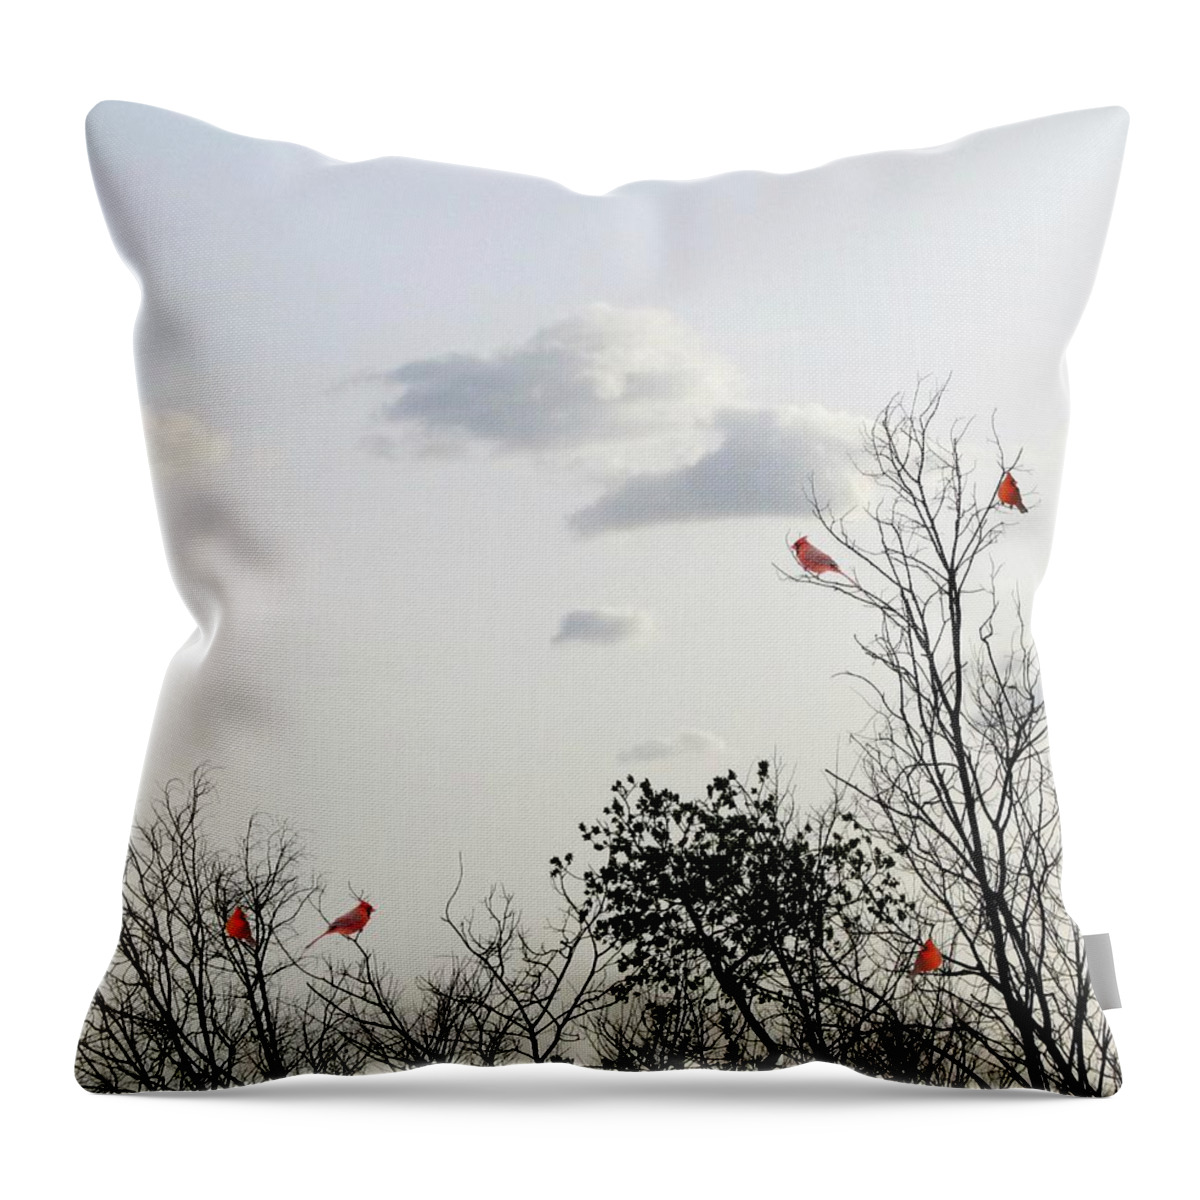 Red Cardinals Throw Pillow featuring the photograph Red Cardinals by Marianna Mills